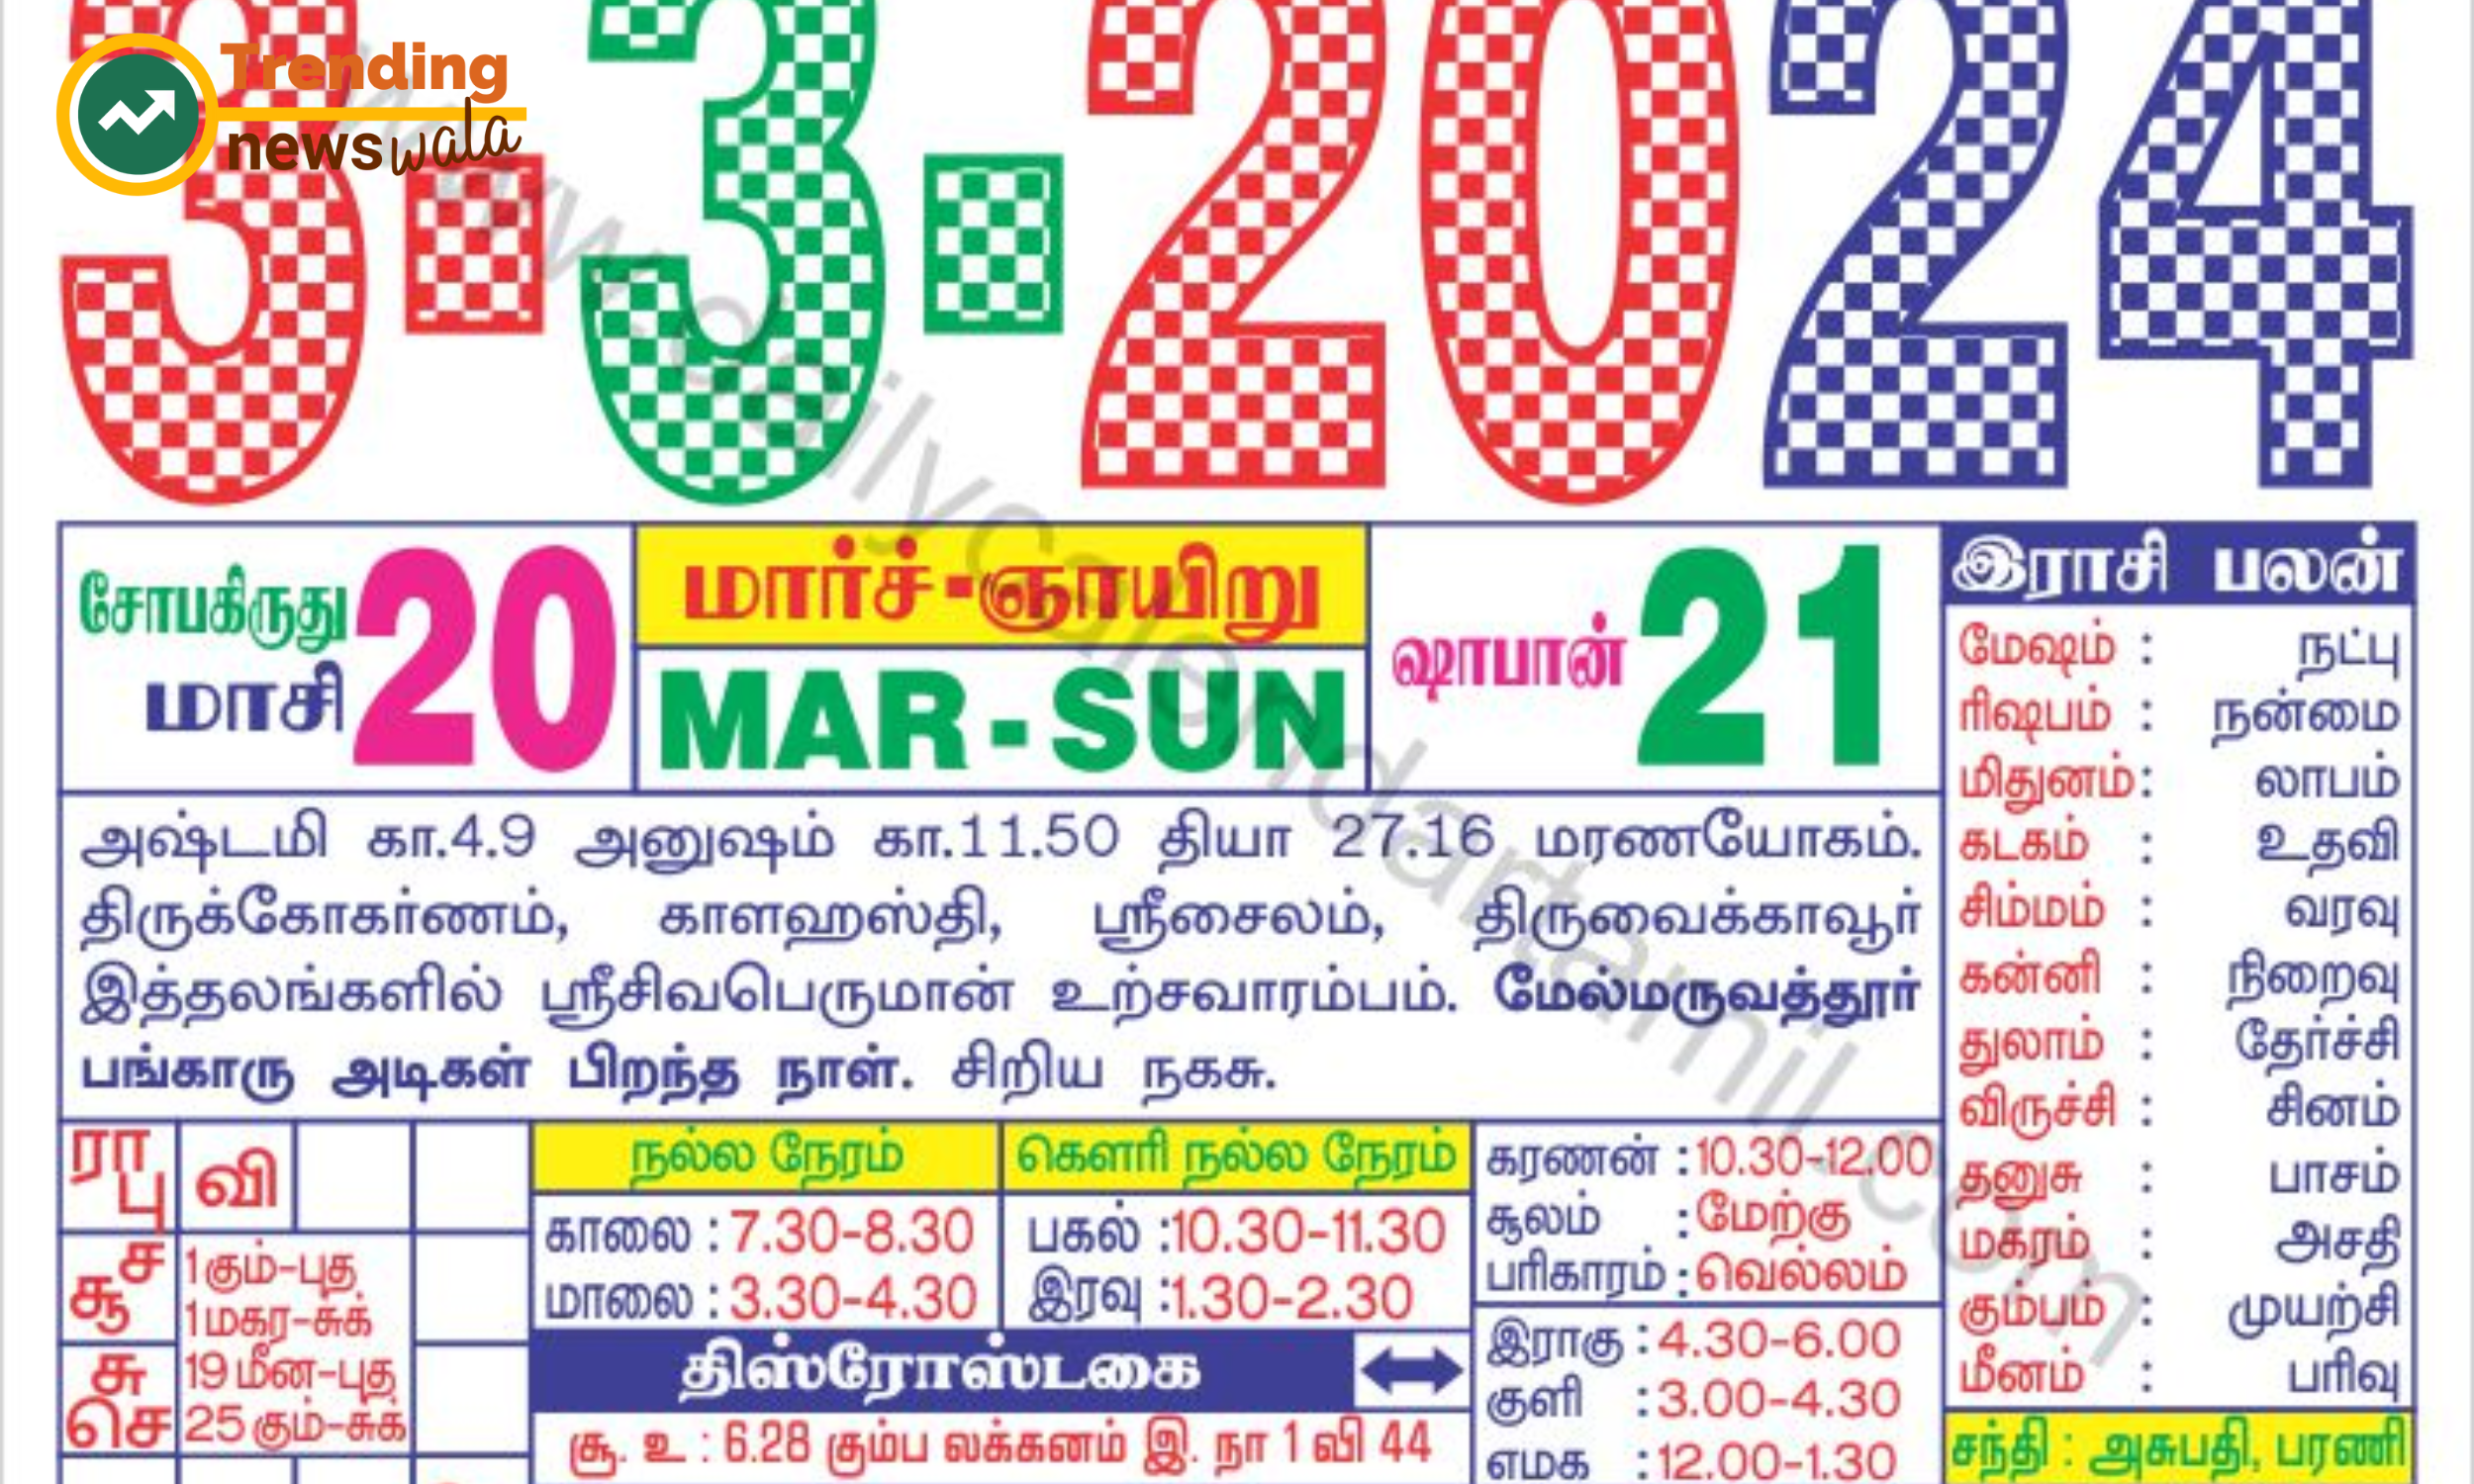 Tamil calendar and Puthandu The Tamil calendar follows a cyclical pattern and is divided into twelve months